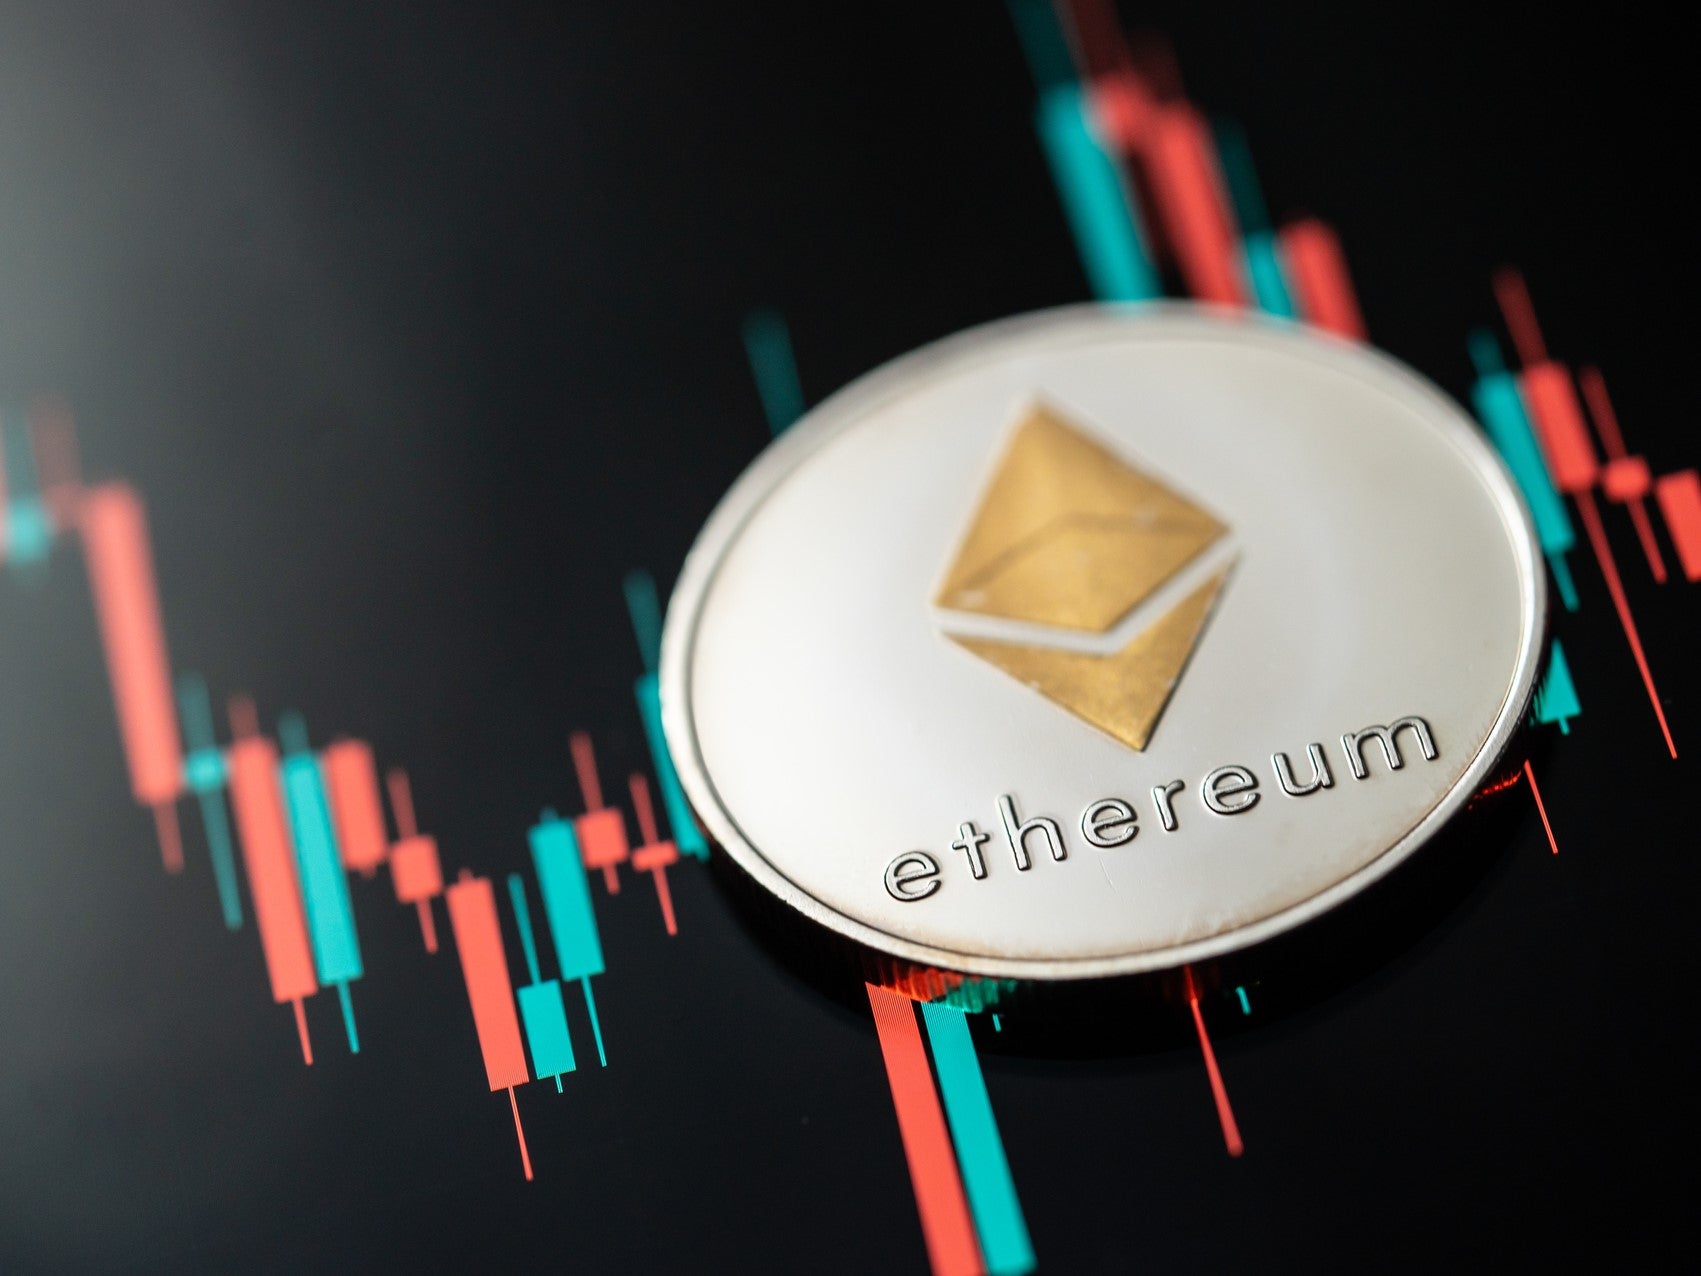 Some crypto market commentators predict Ethereum (ETH) could see more significant price movements following its momentous ‘Merge’ event in September 2022